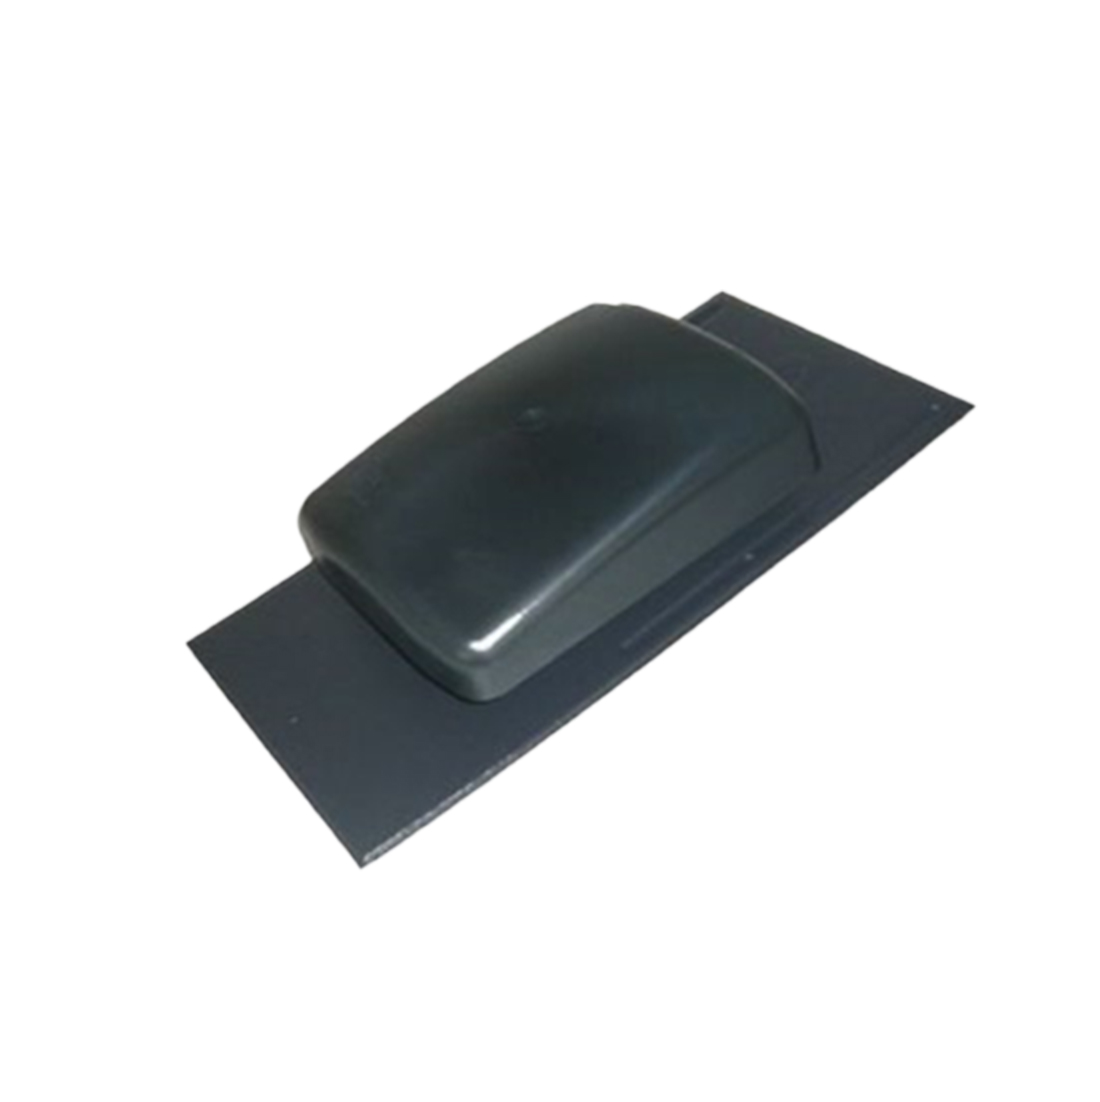 Ubbink UB19 600mm x 300mm Slate vent with sleeve(No Adapter)